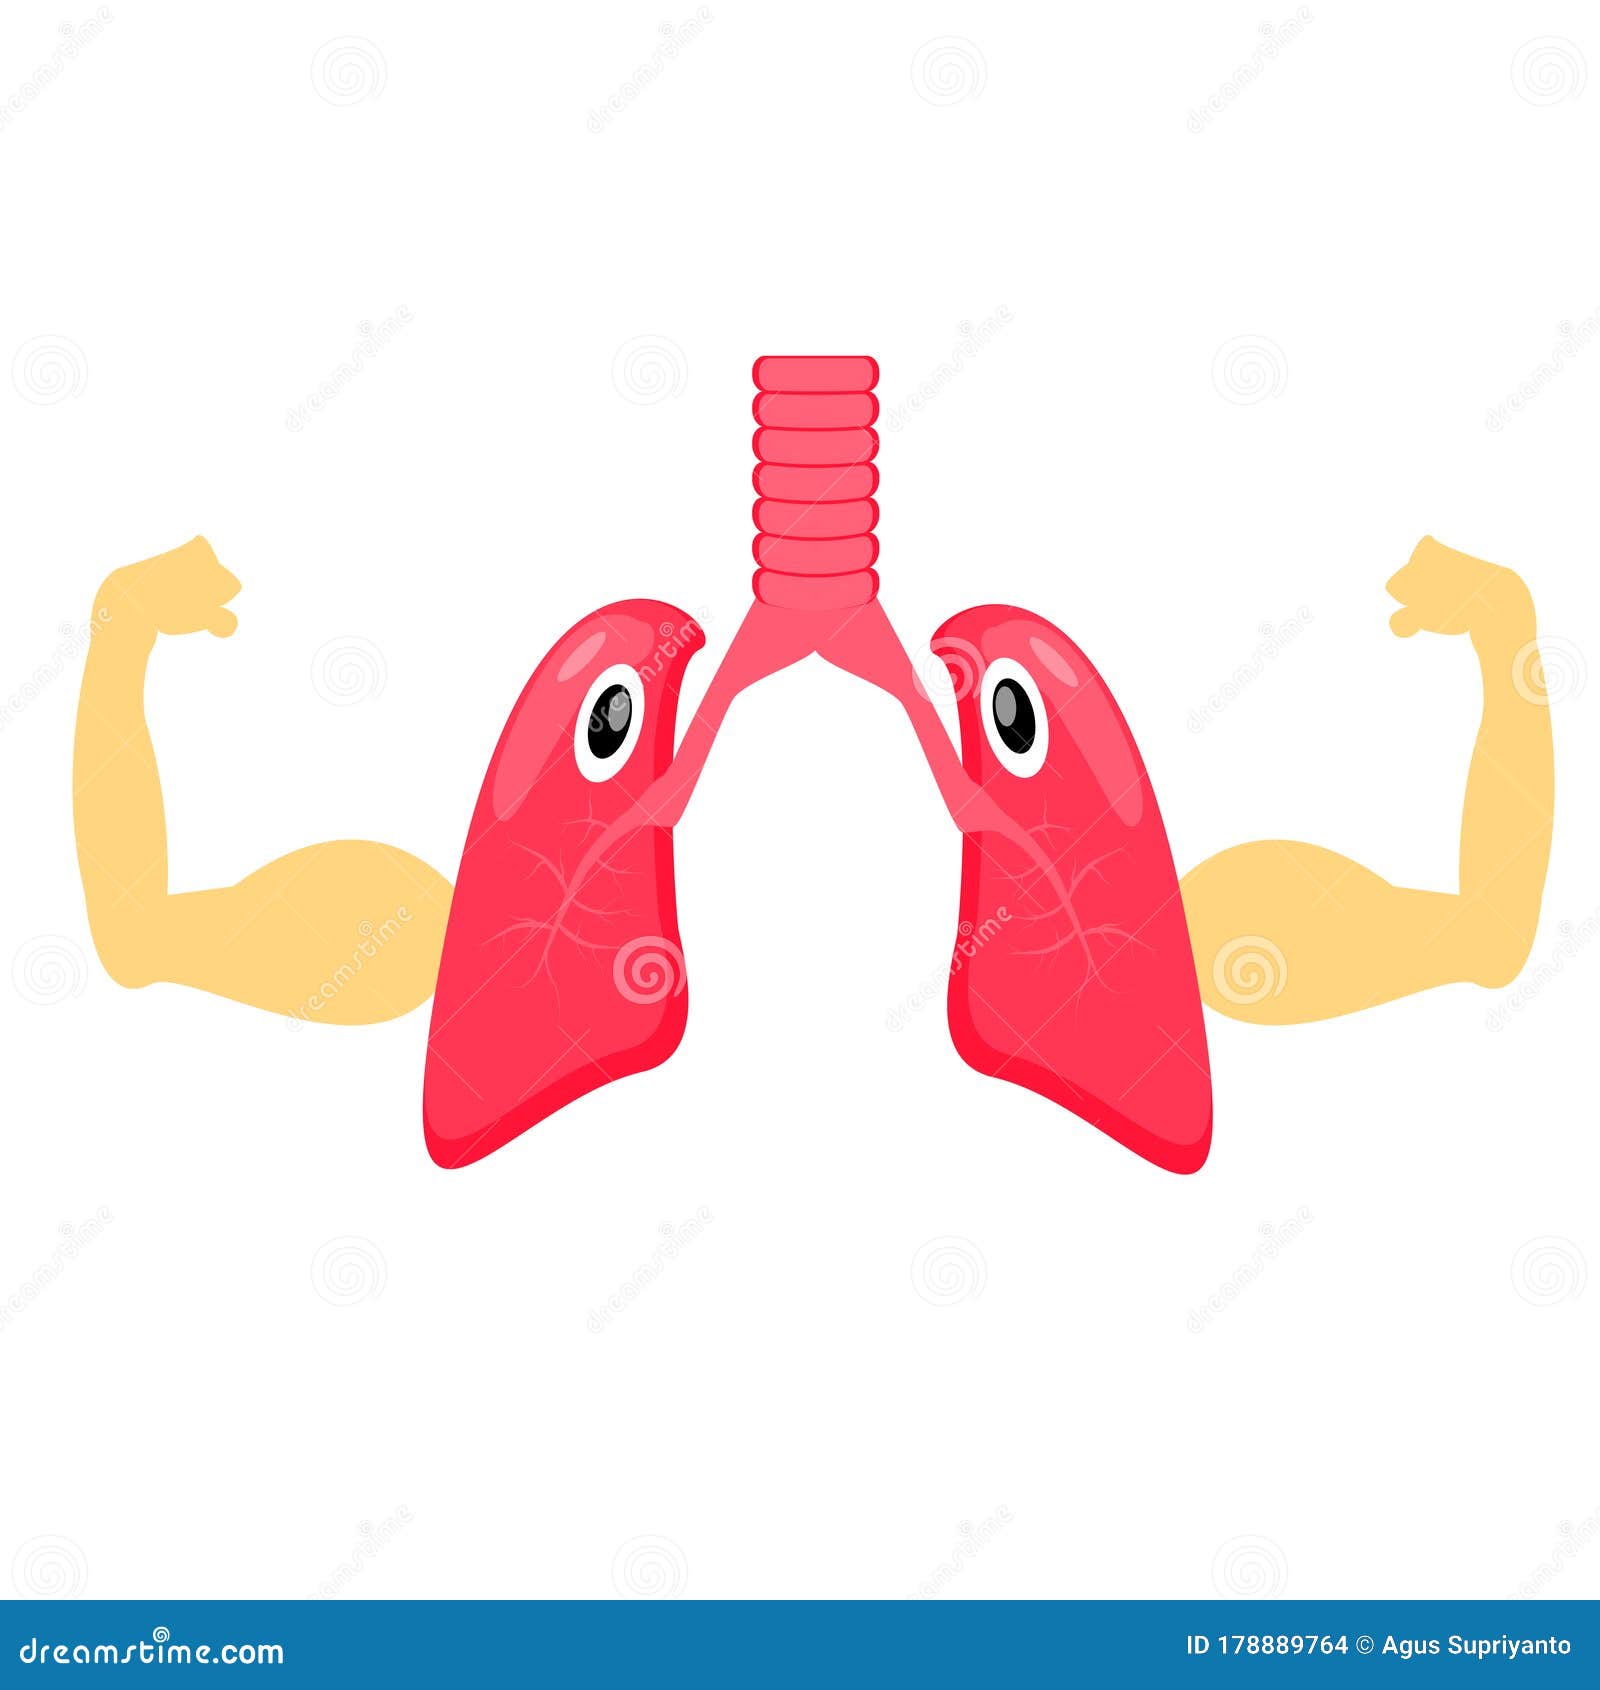 Lung Images With A Strong Arm Character Vector ...